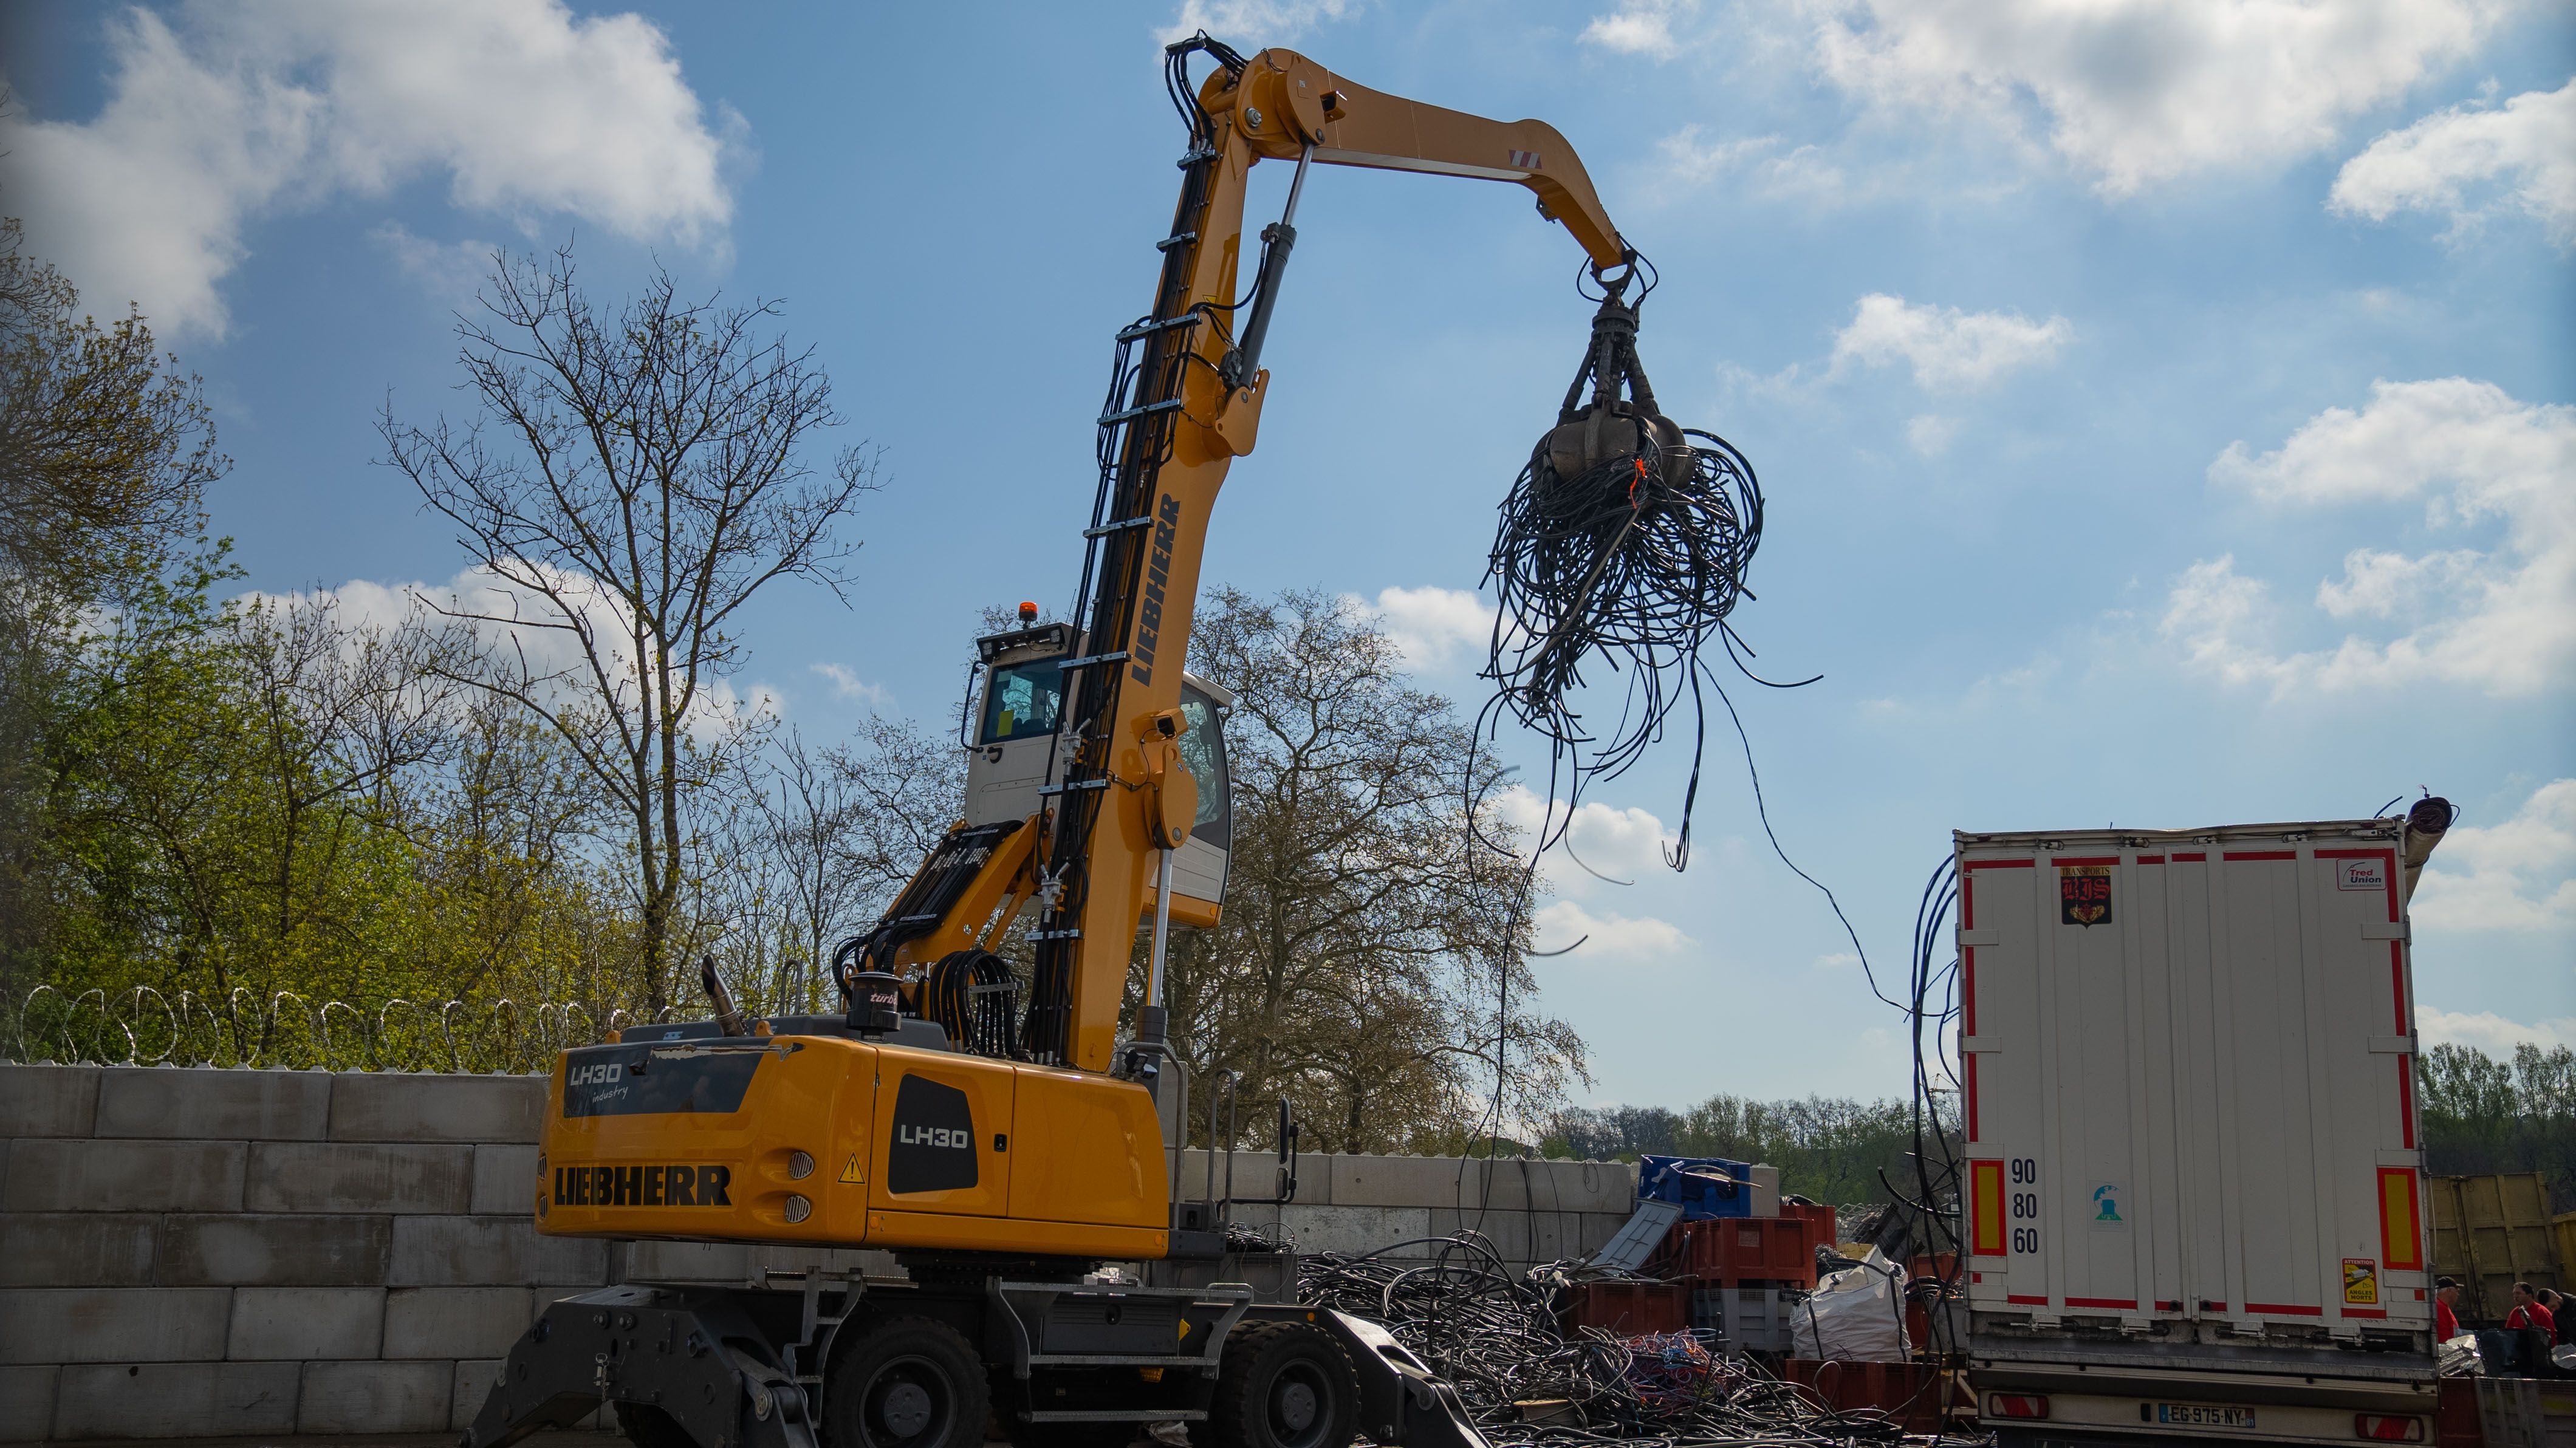 This picture shows a crane filling a skip with ferrous metals